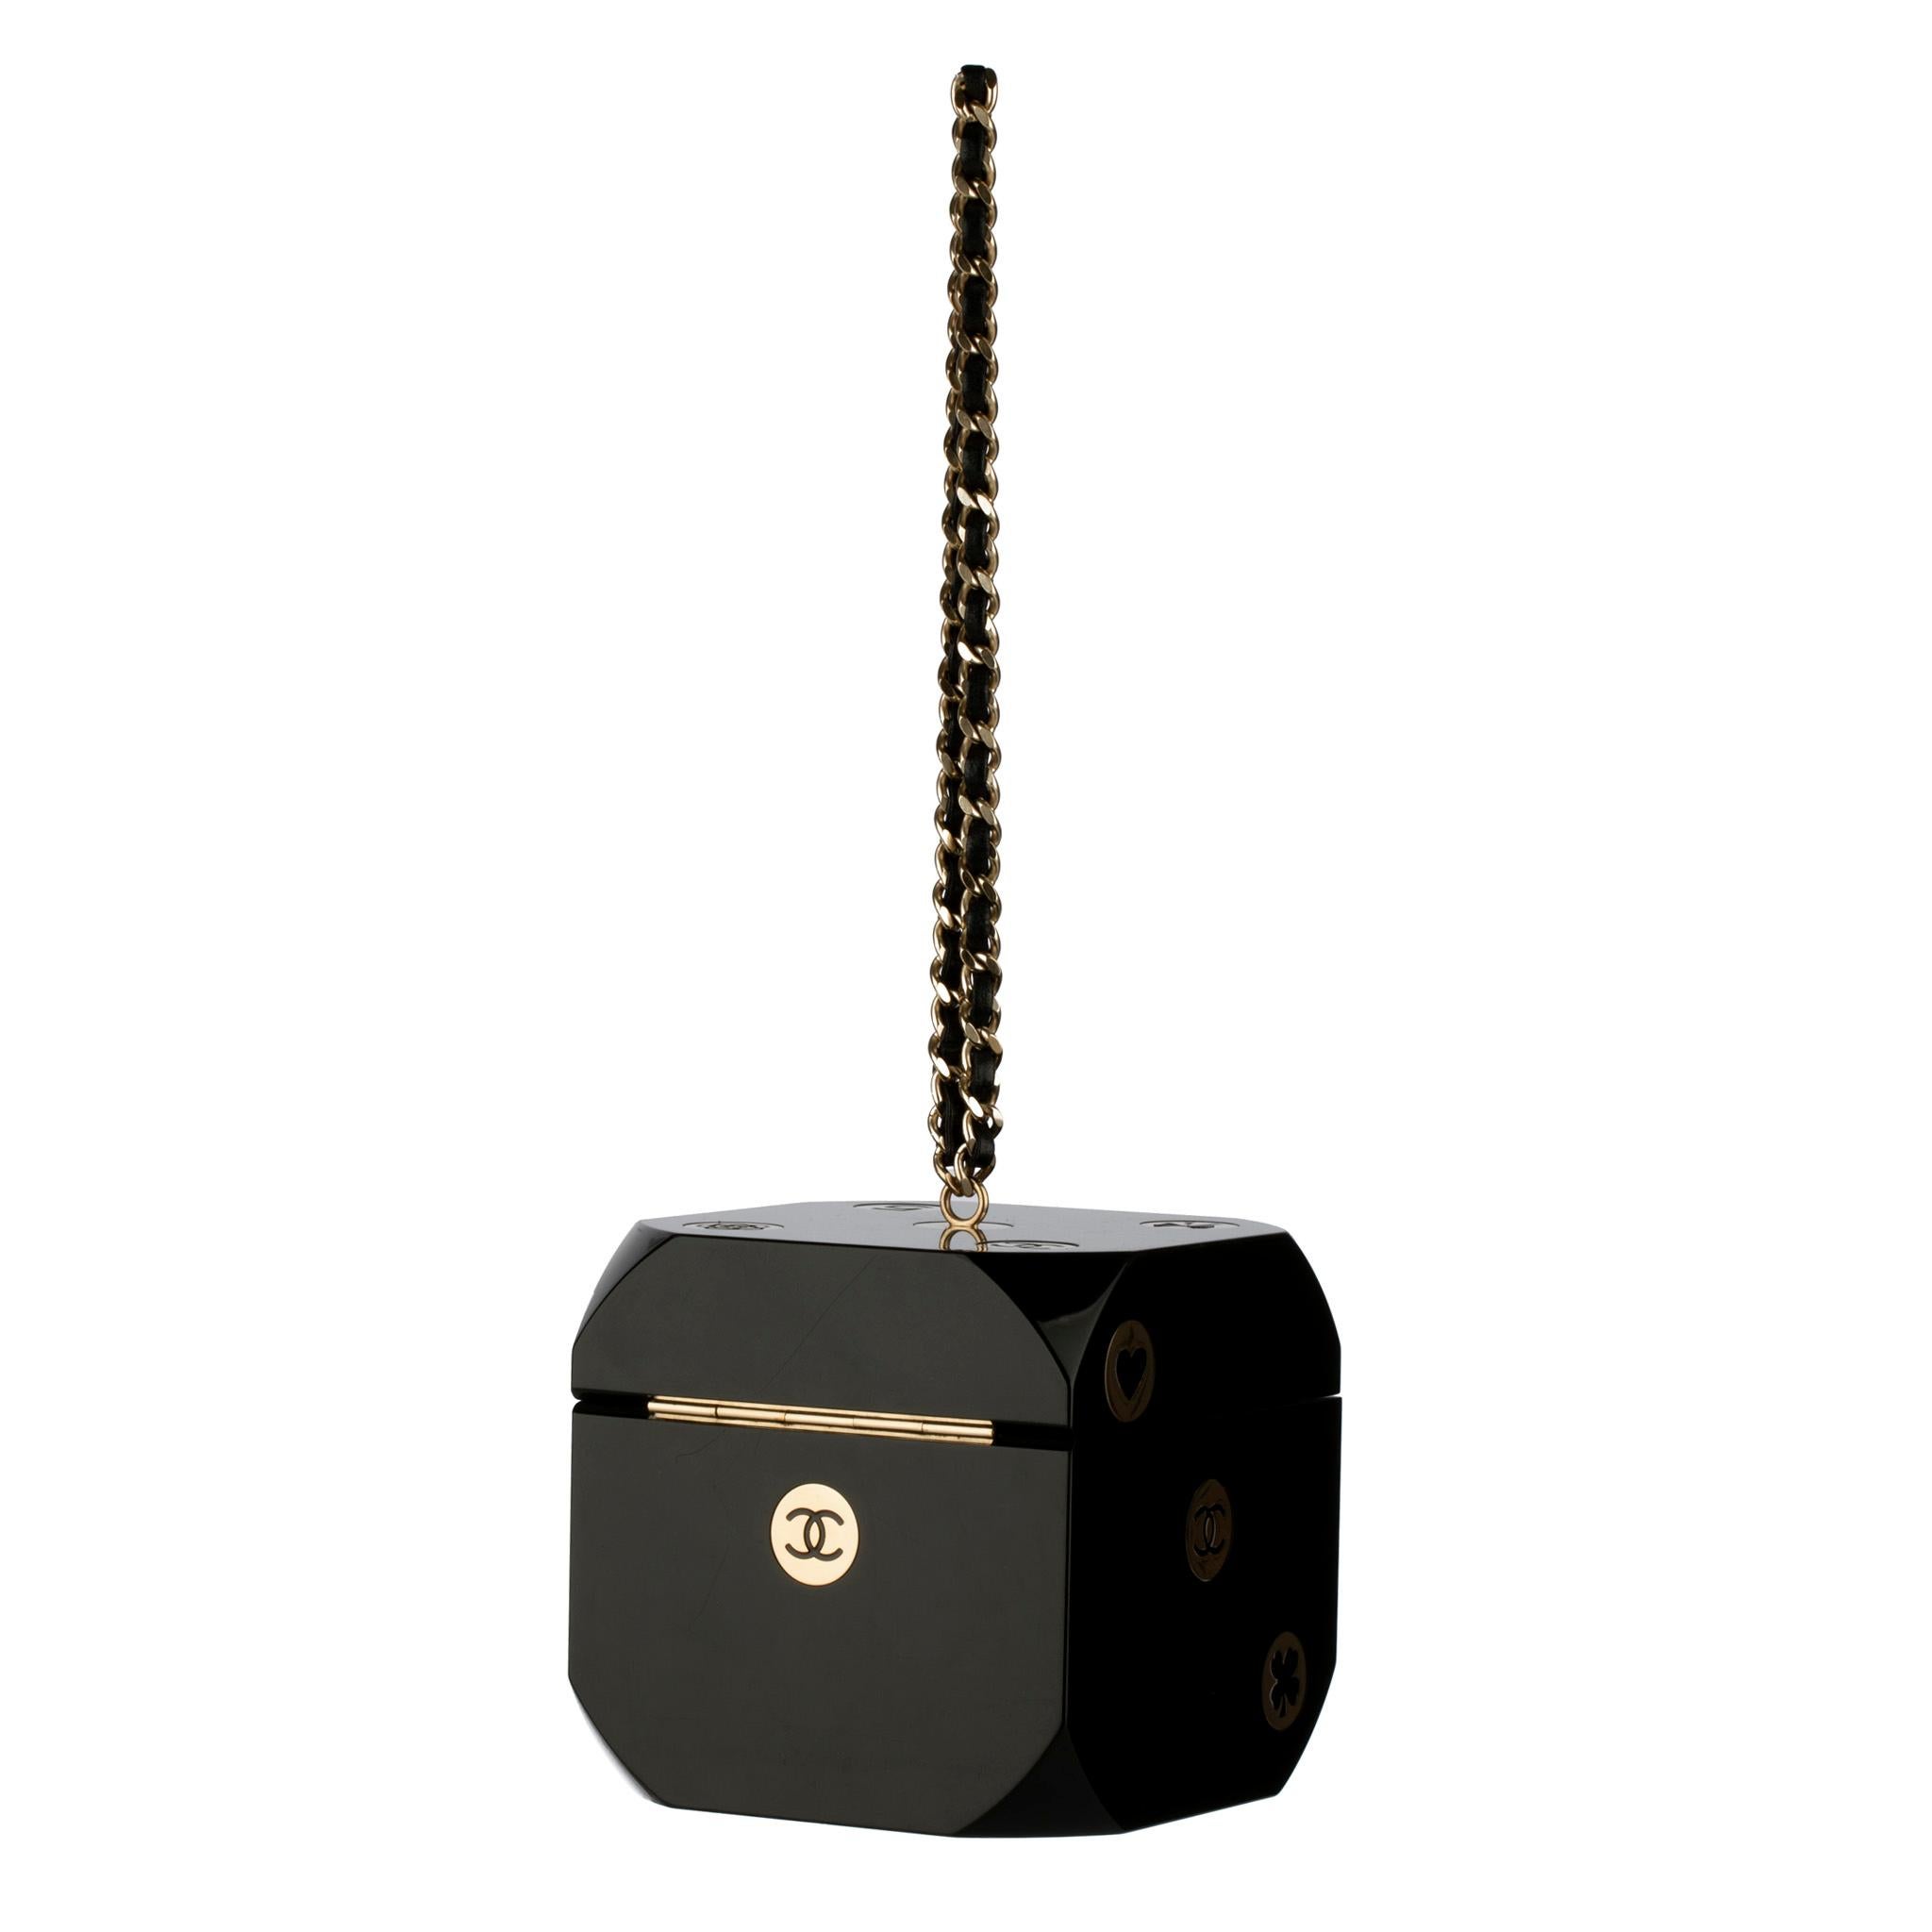 Chanel Minaudière Limited Edition Casino Dice Black Gold-Tone Hardware For Sale 11